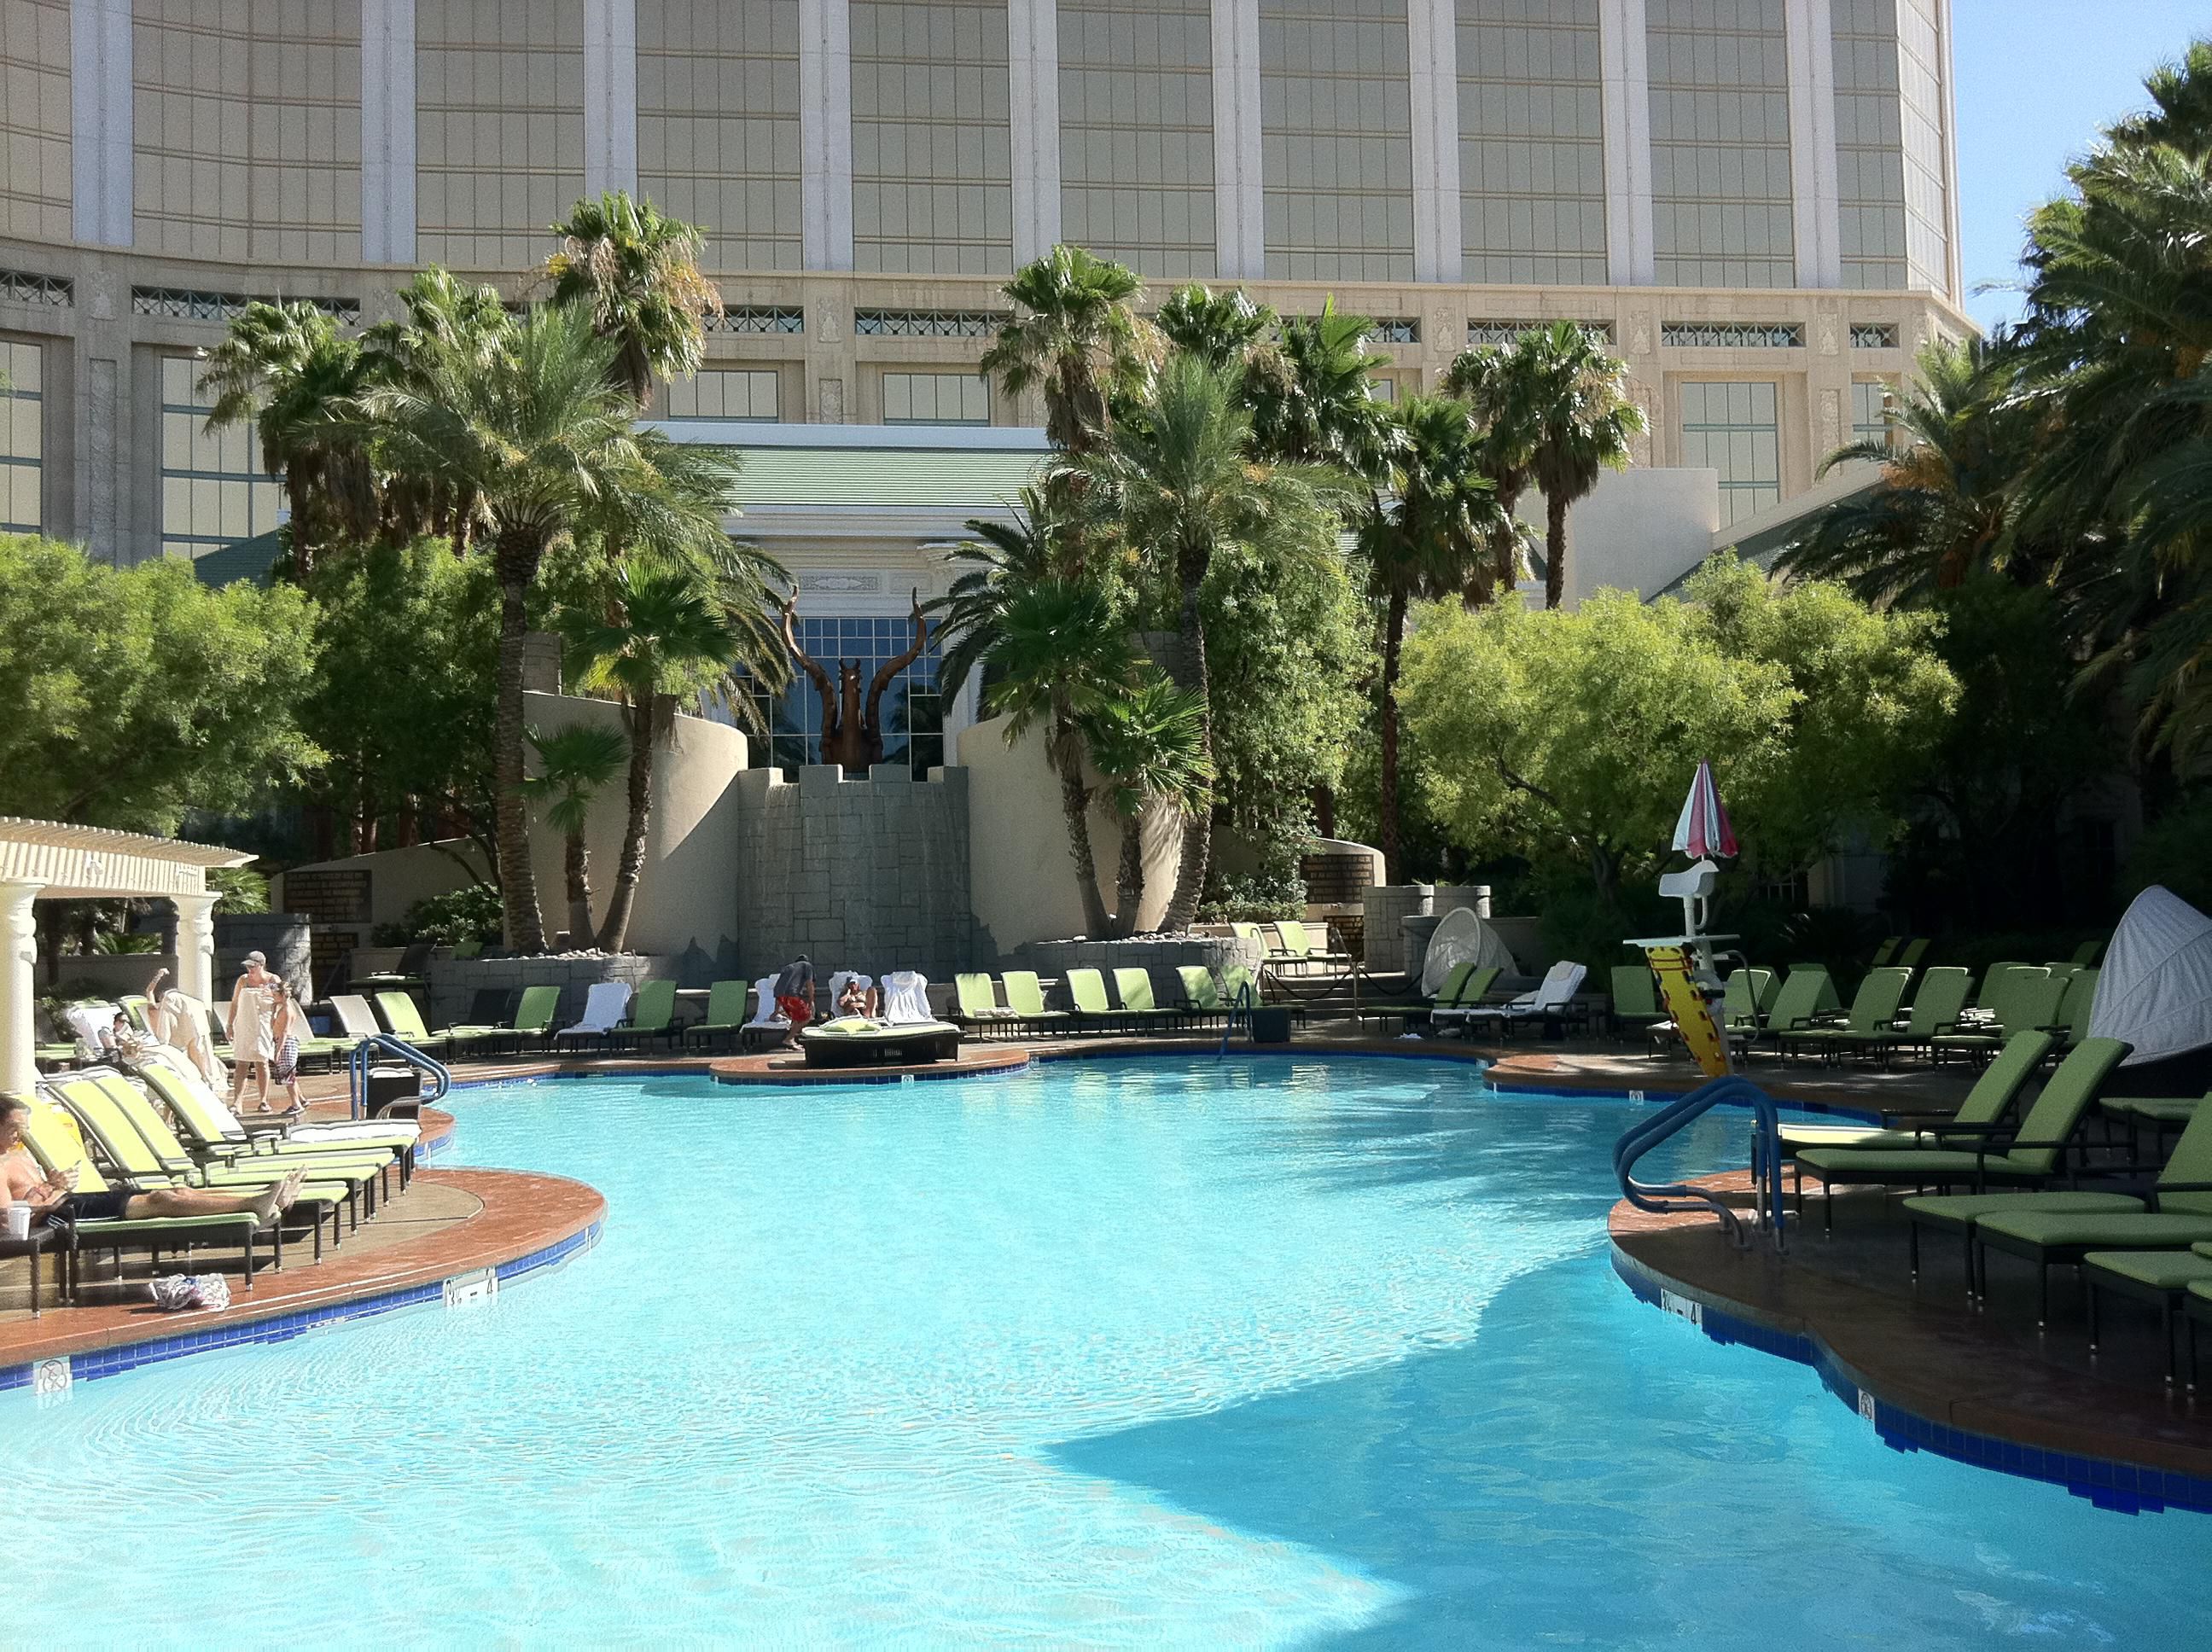 What is the most kid friendly hotel in las vegas